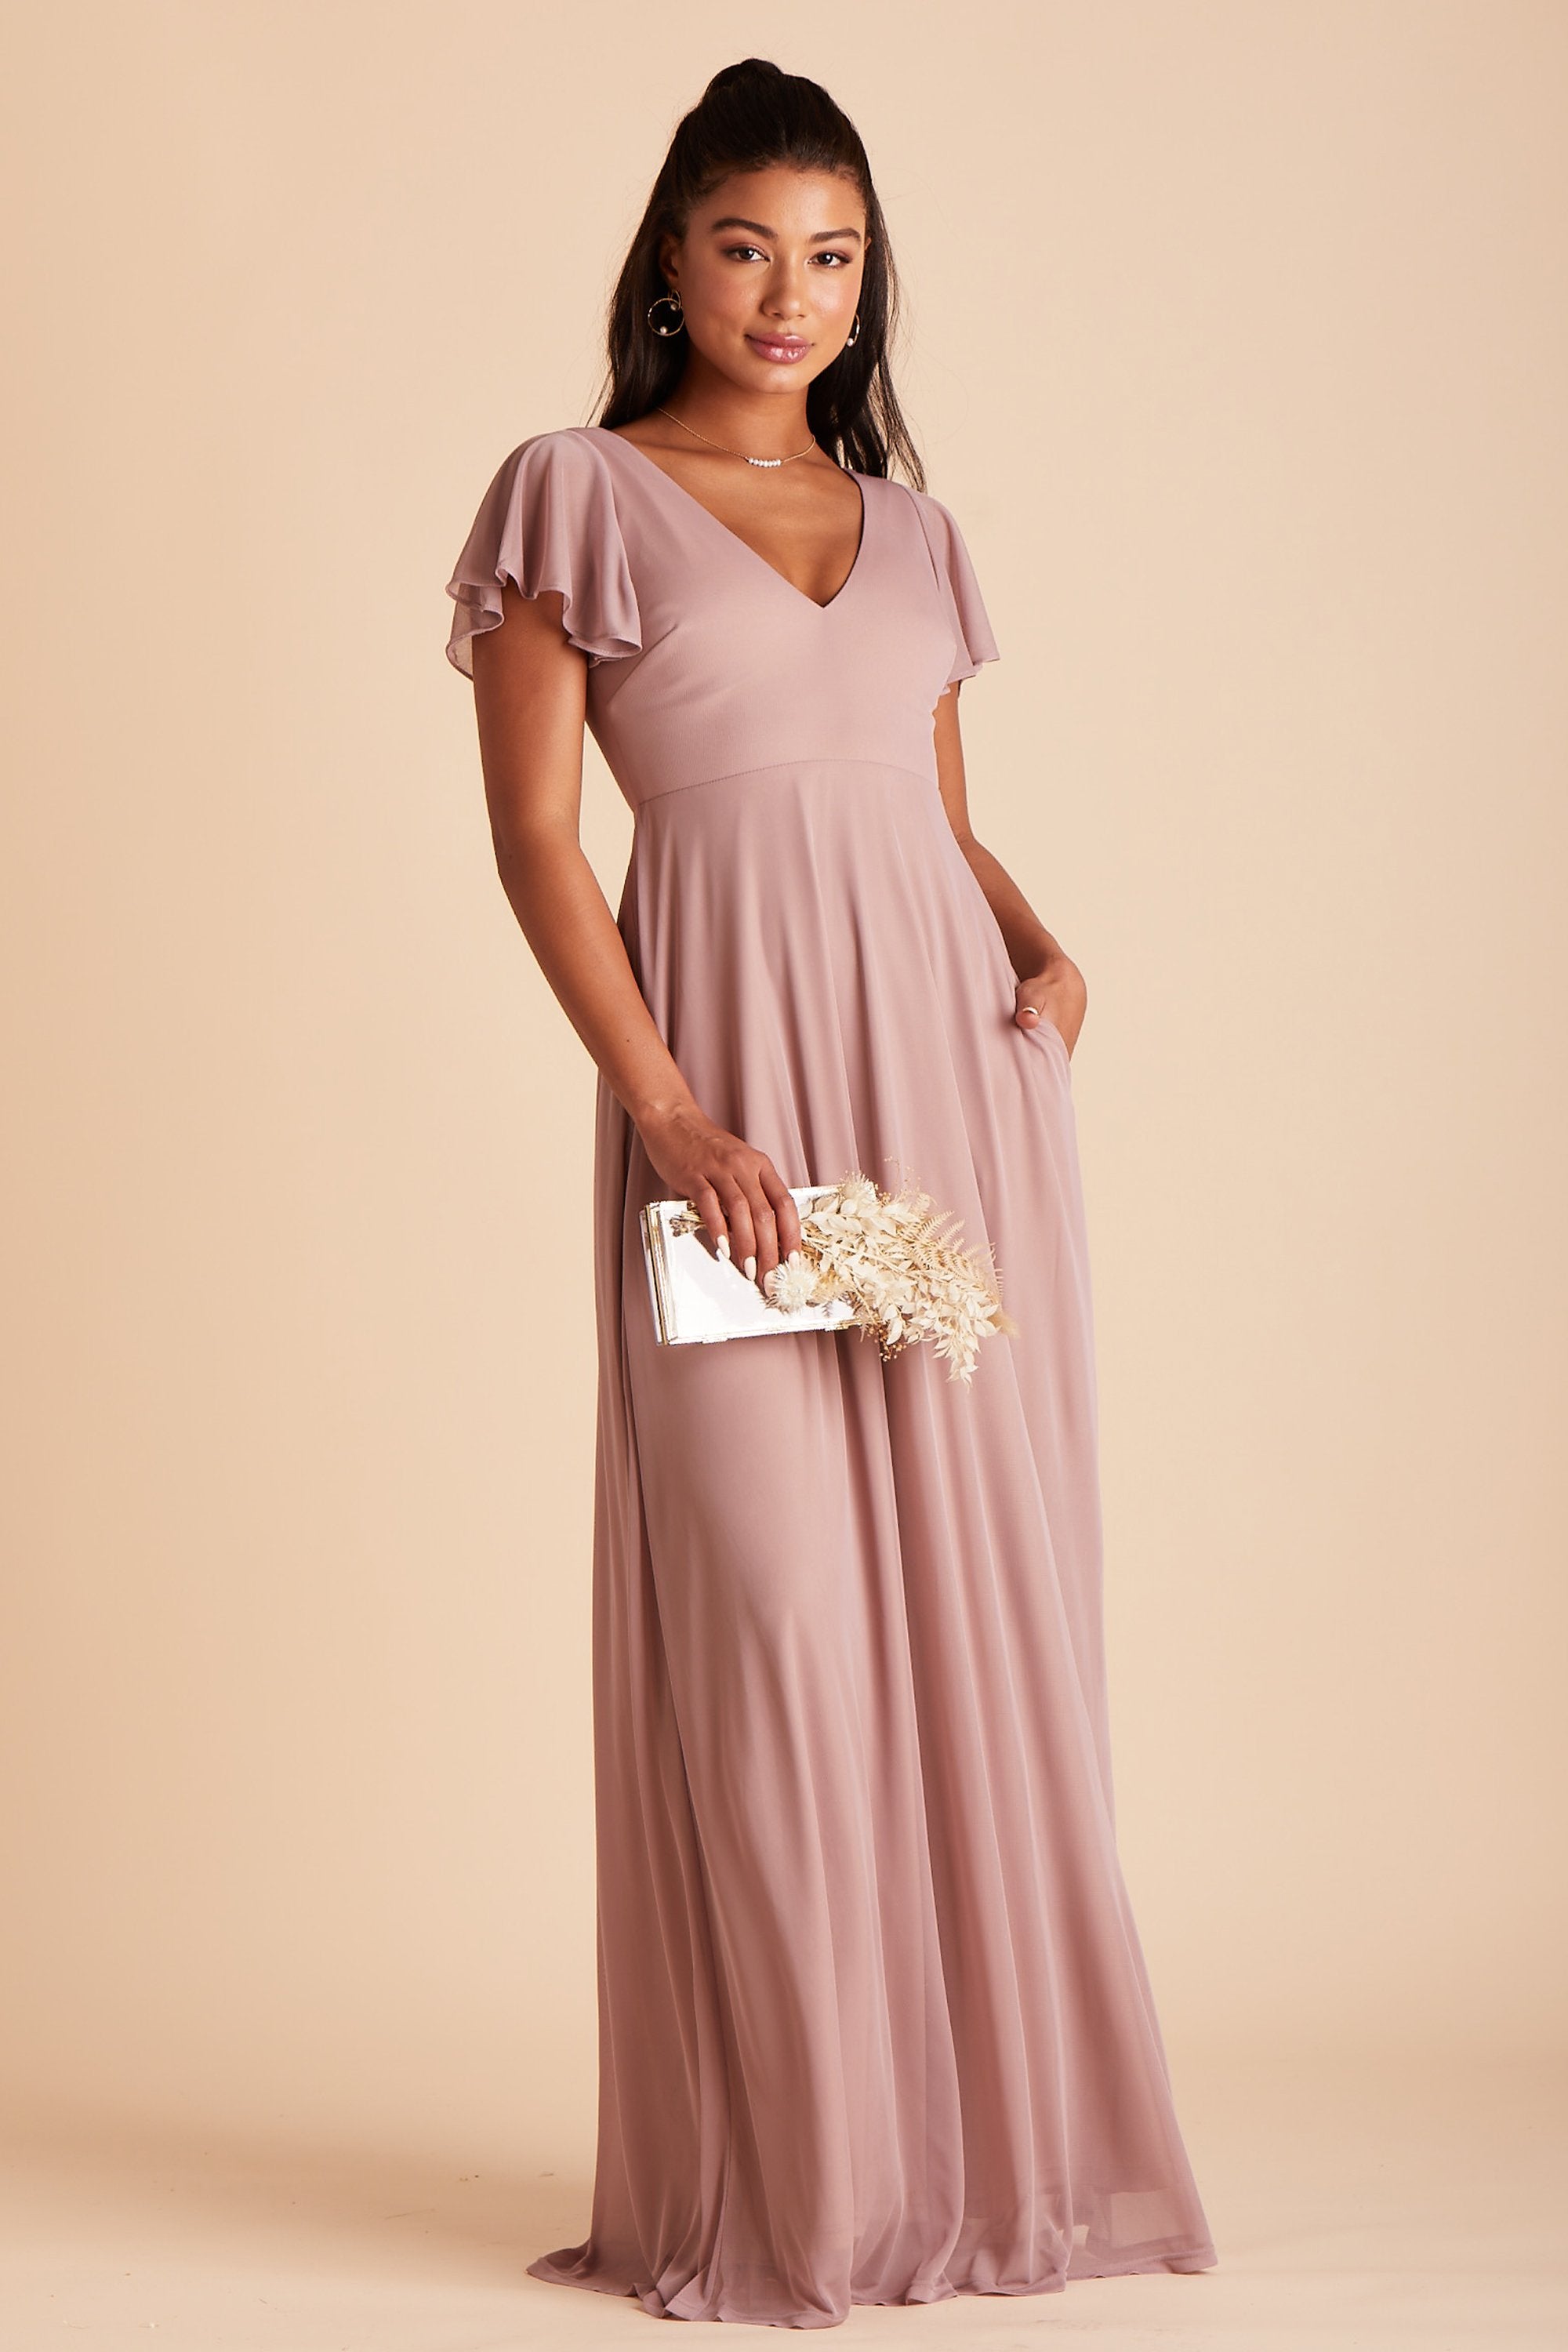 Hannah bridesmaids dress in mauve chiffon by Birdy Grey, front view with hand in pocket